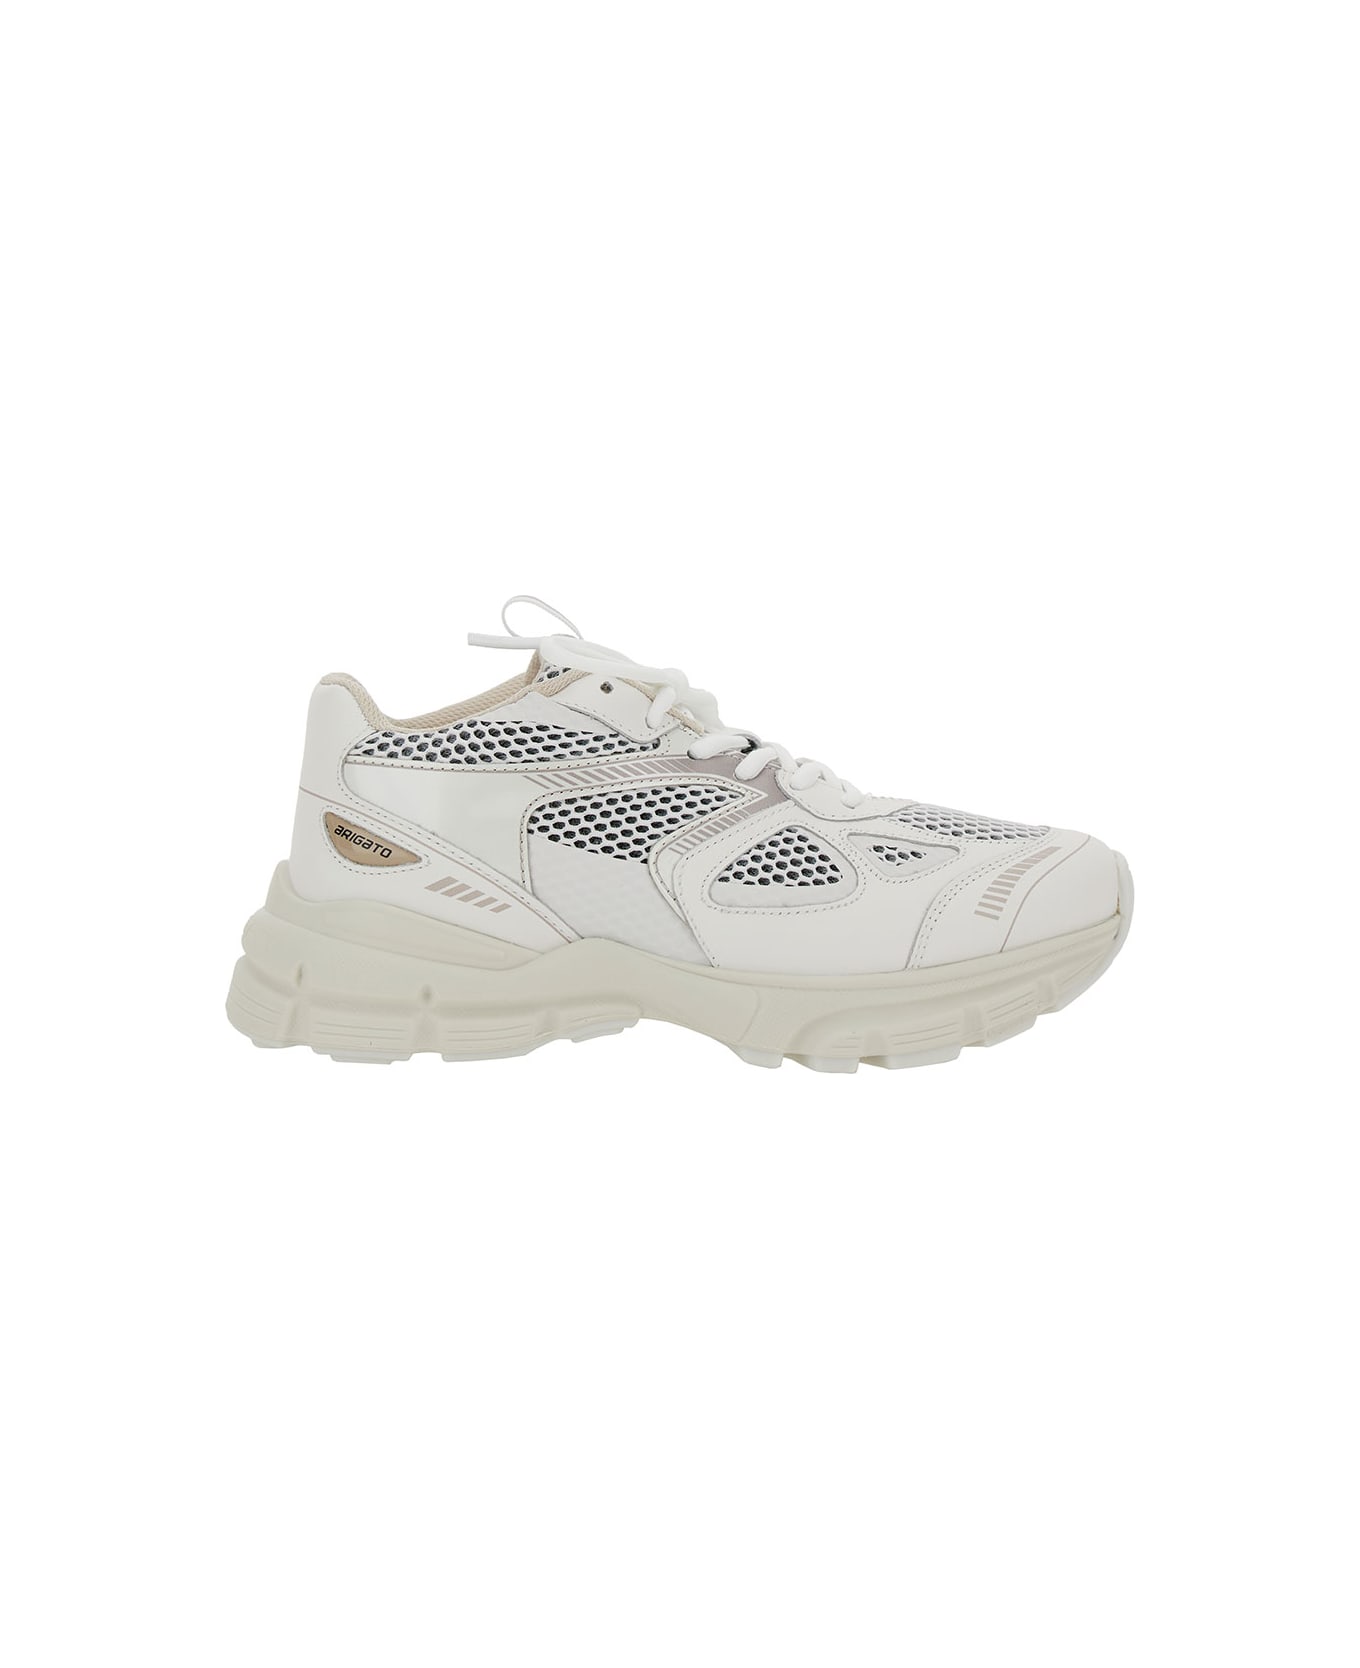 Axel Arigato 'marathon Runner' White Low Top Sneakers With Reflective Details In Leather Blend Woman - White